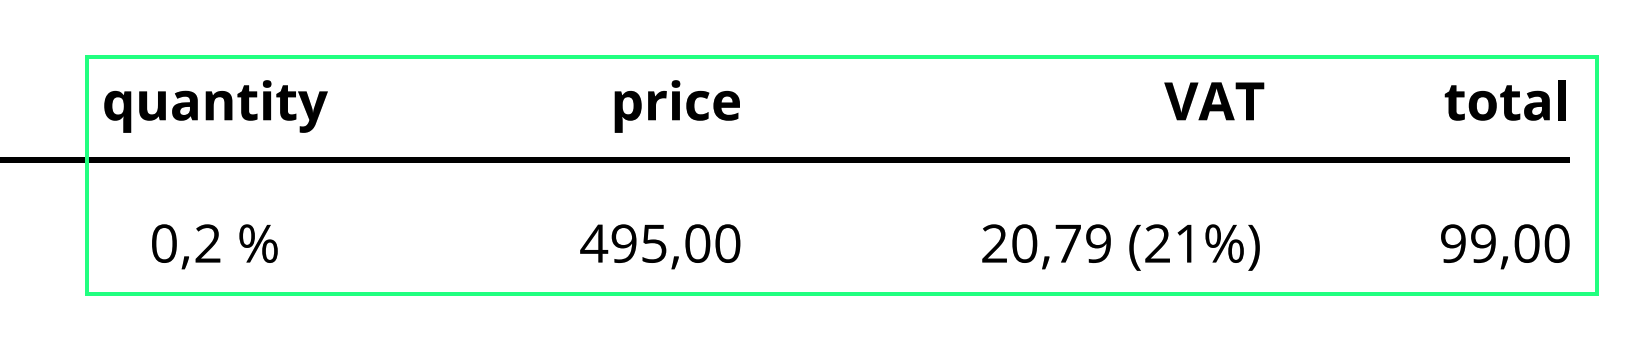 Advance-invoice-price-and-total-price.png